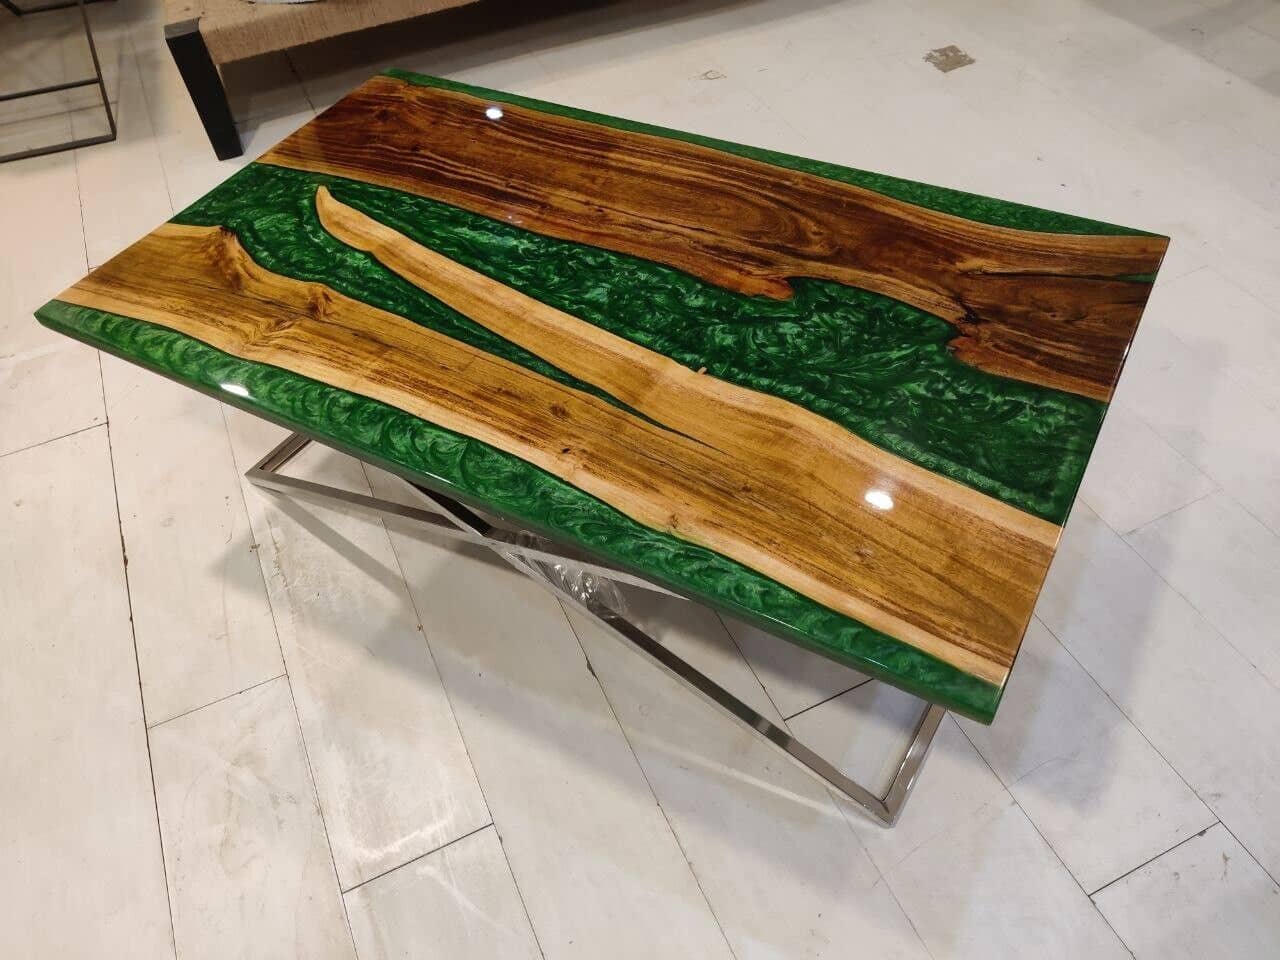 patio furniture, bedroom furniture, live edge dining table, handmade table, wood table, dining room table, wood table top, custom dining table, modern tables,